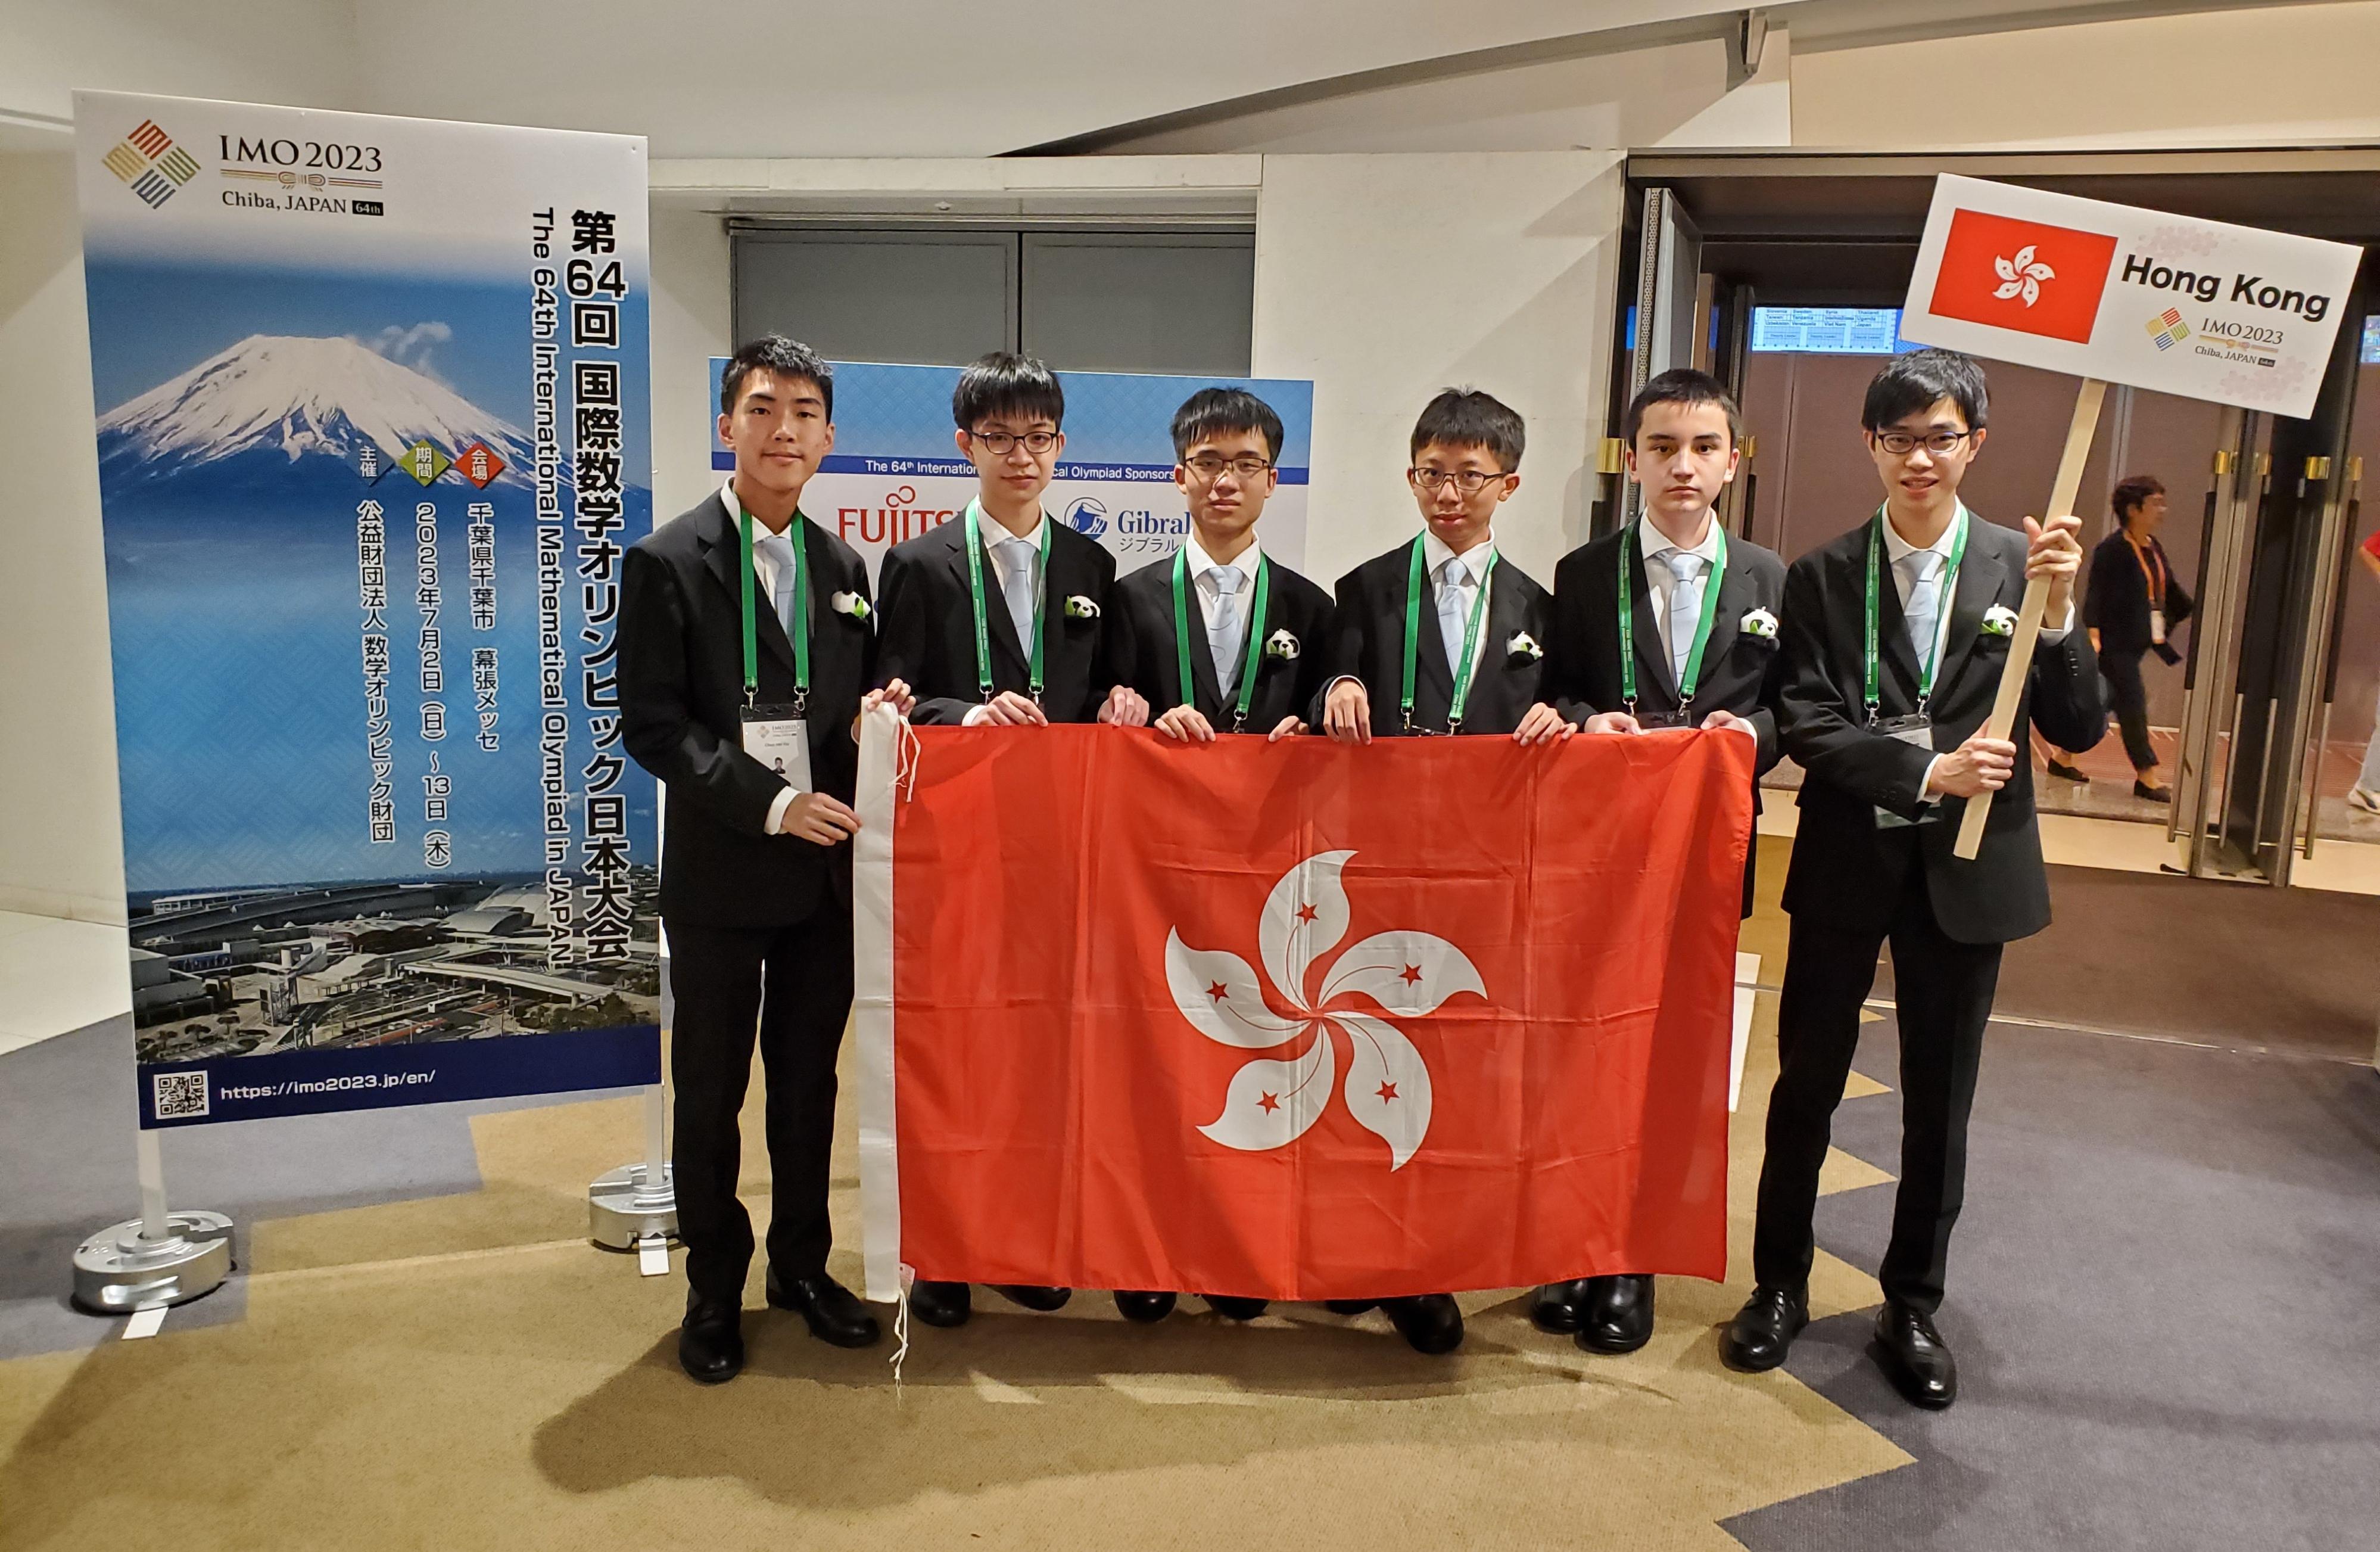 Six students representing Hong Kong achieved remarkable results in the 64th International Mathematical Olympiad which was held in Japan from July 2 to 13. They are (from left) Yiu Chun-hei, Ng Hok-lai, Hsieh Chong-ho, Kwan Yung-ho, Chase Sebastian and Chu Cheuk-hei.
